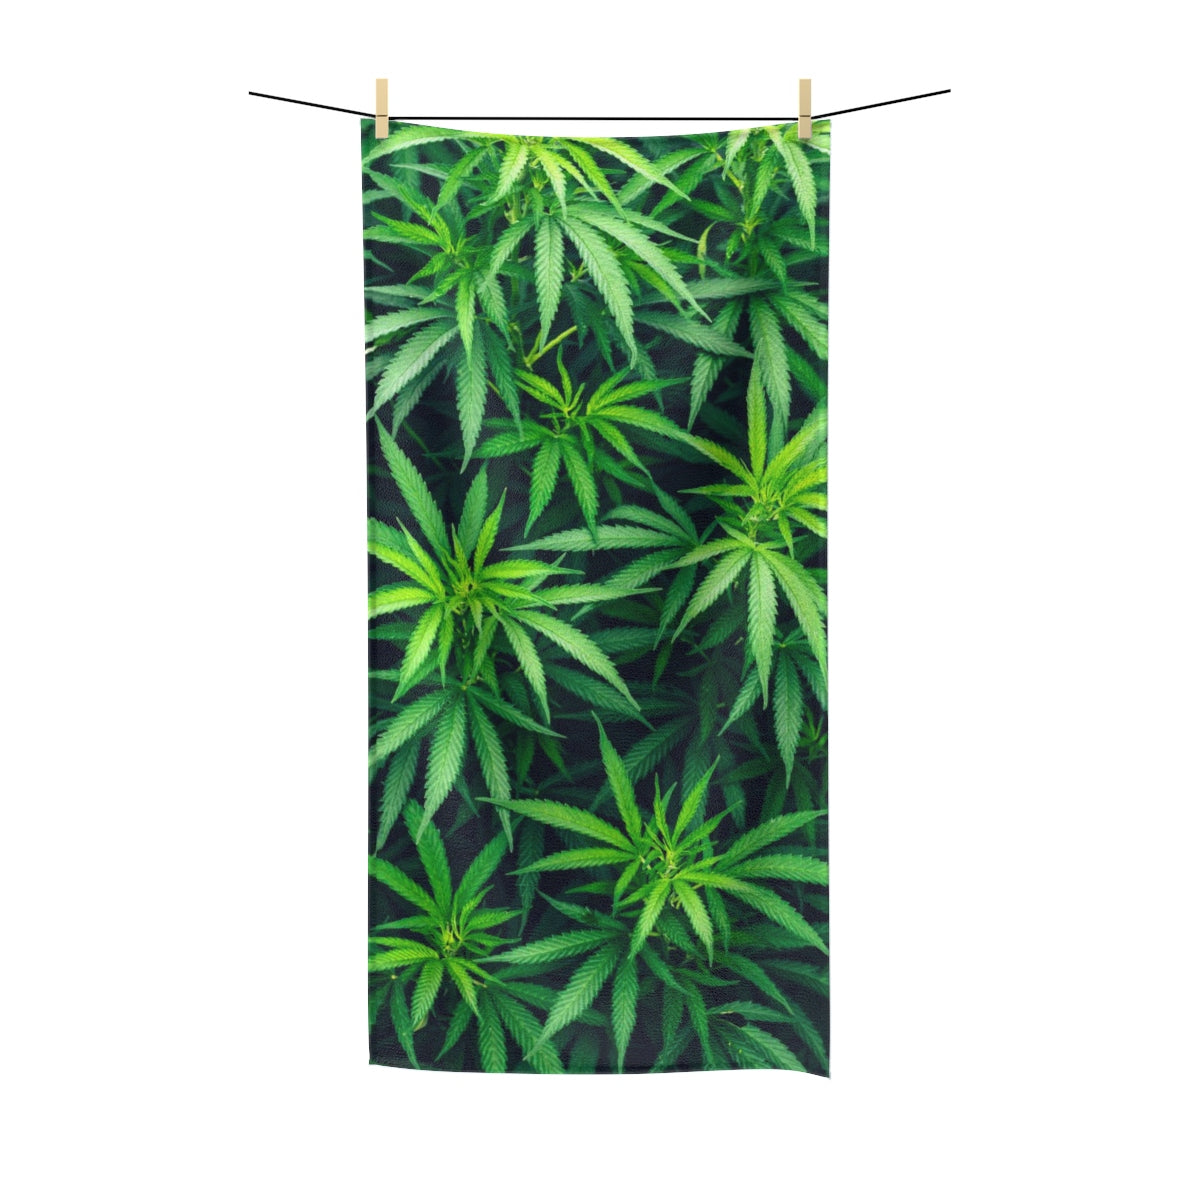 My Cannabis Custom Designed Towel.  A Unique Cannabis Gift For Friends & Family. Cannabis Decor For Your Home.